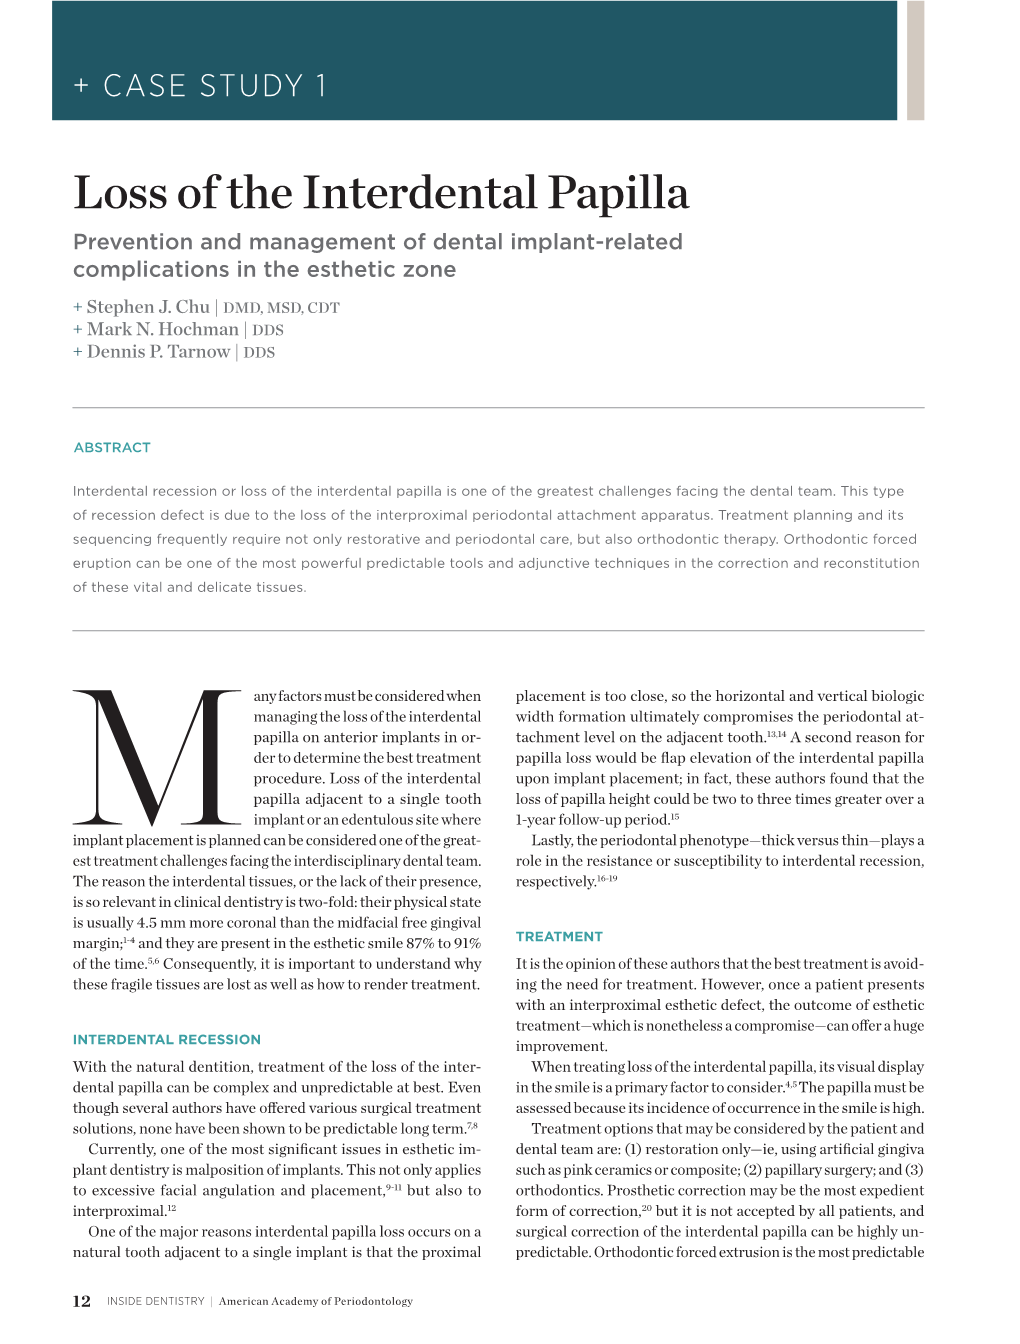 Loss of the Interdental Papilla Prevention and Management of Dental Implant-Related Complications in the Esthetic Zone